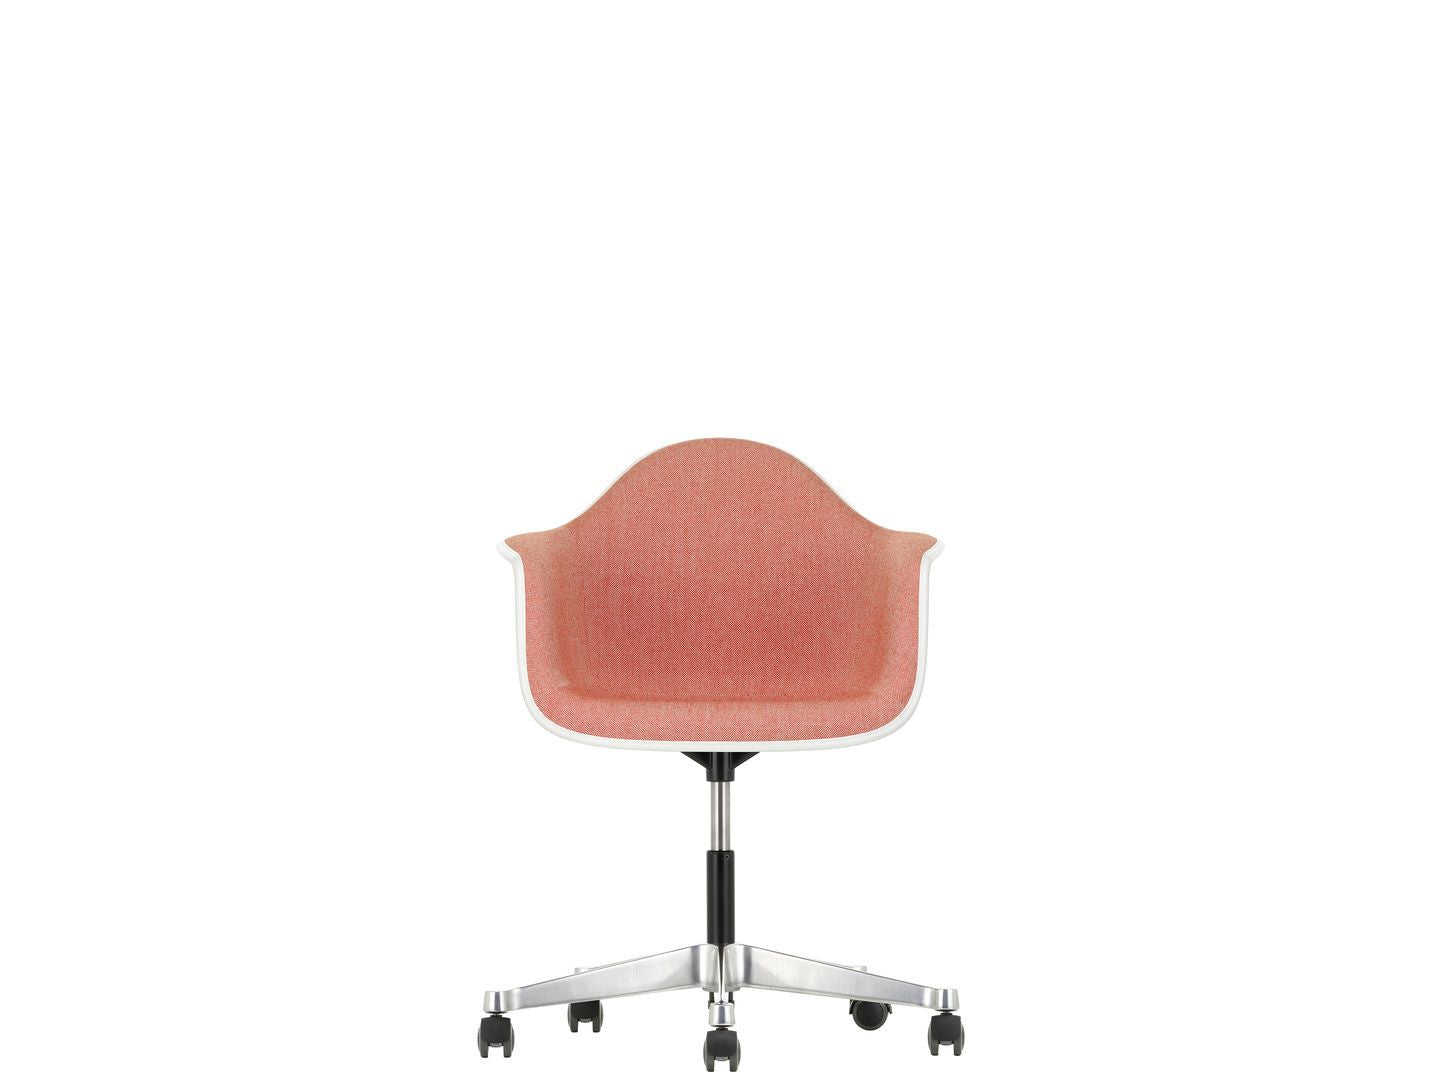 Eames Plastic Armchair PACC | One52 Furniture 